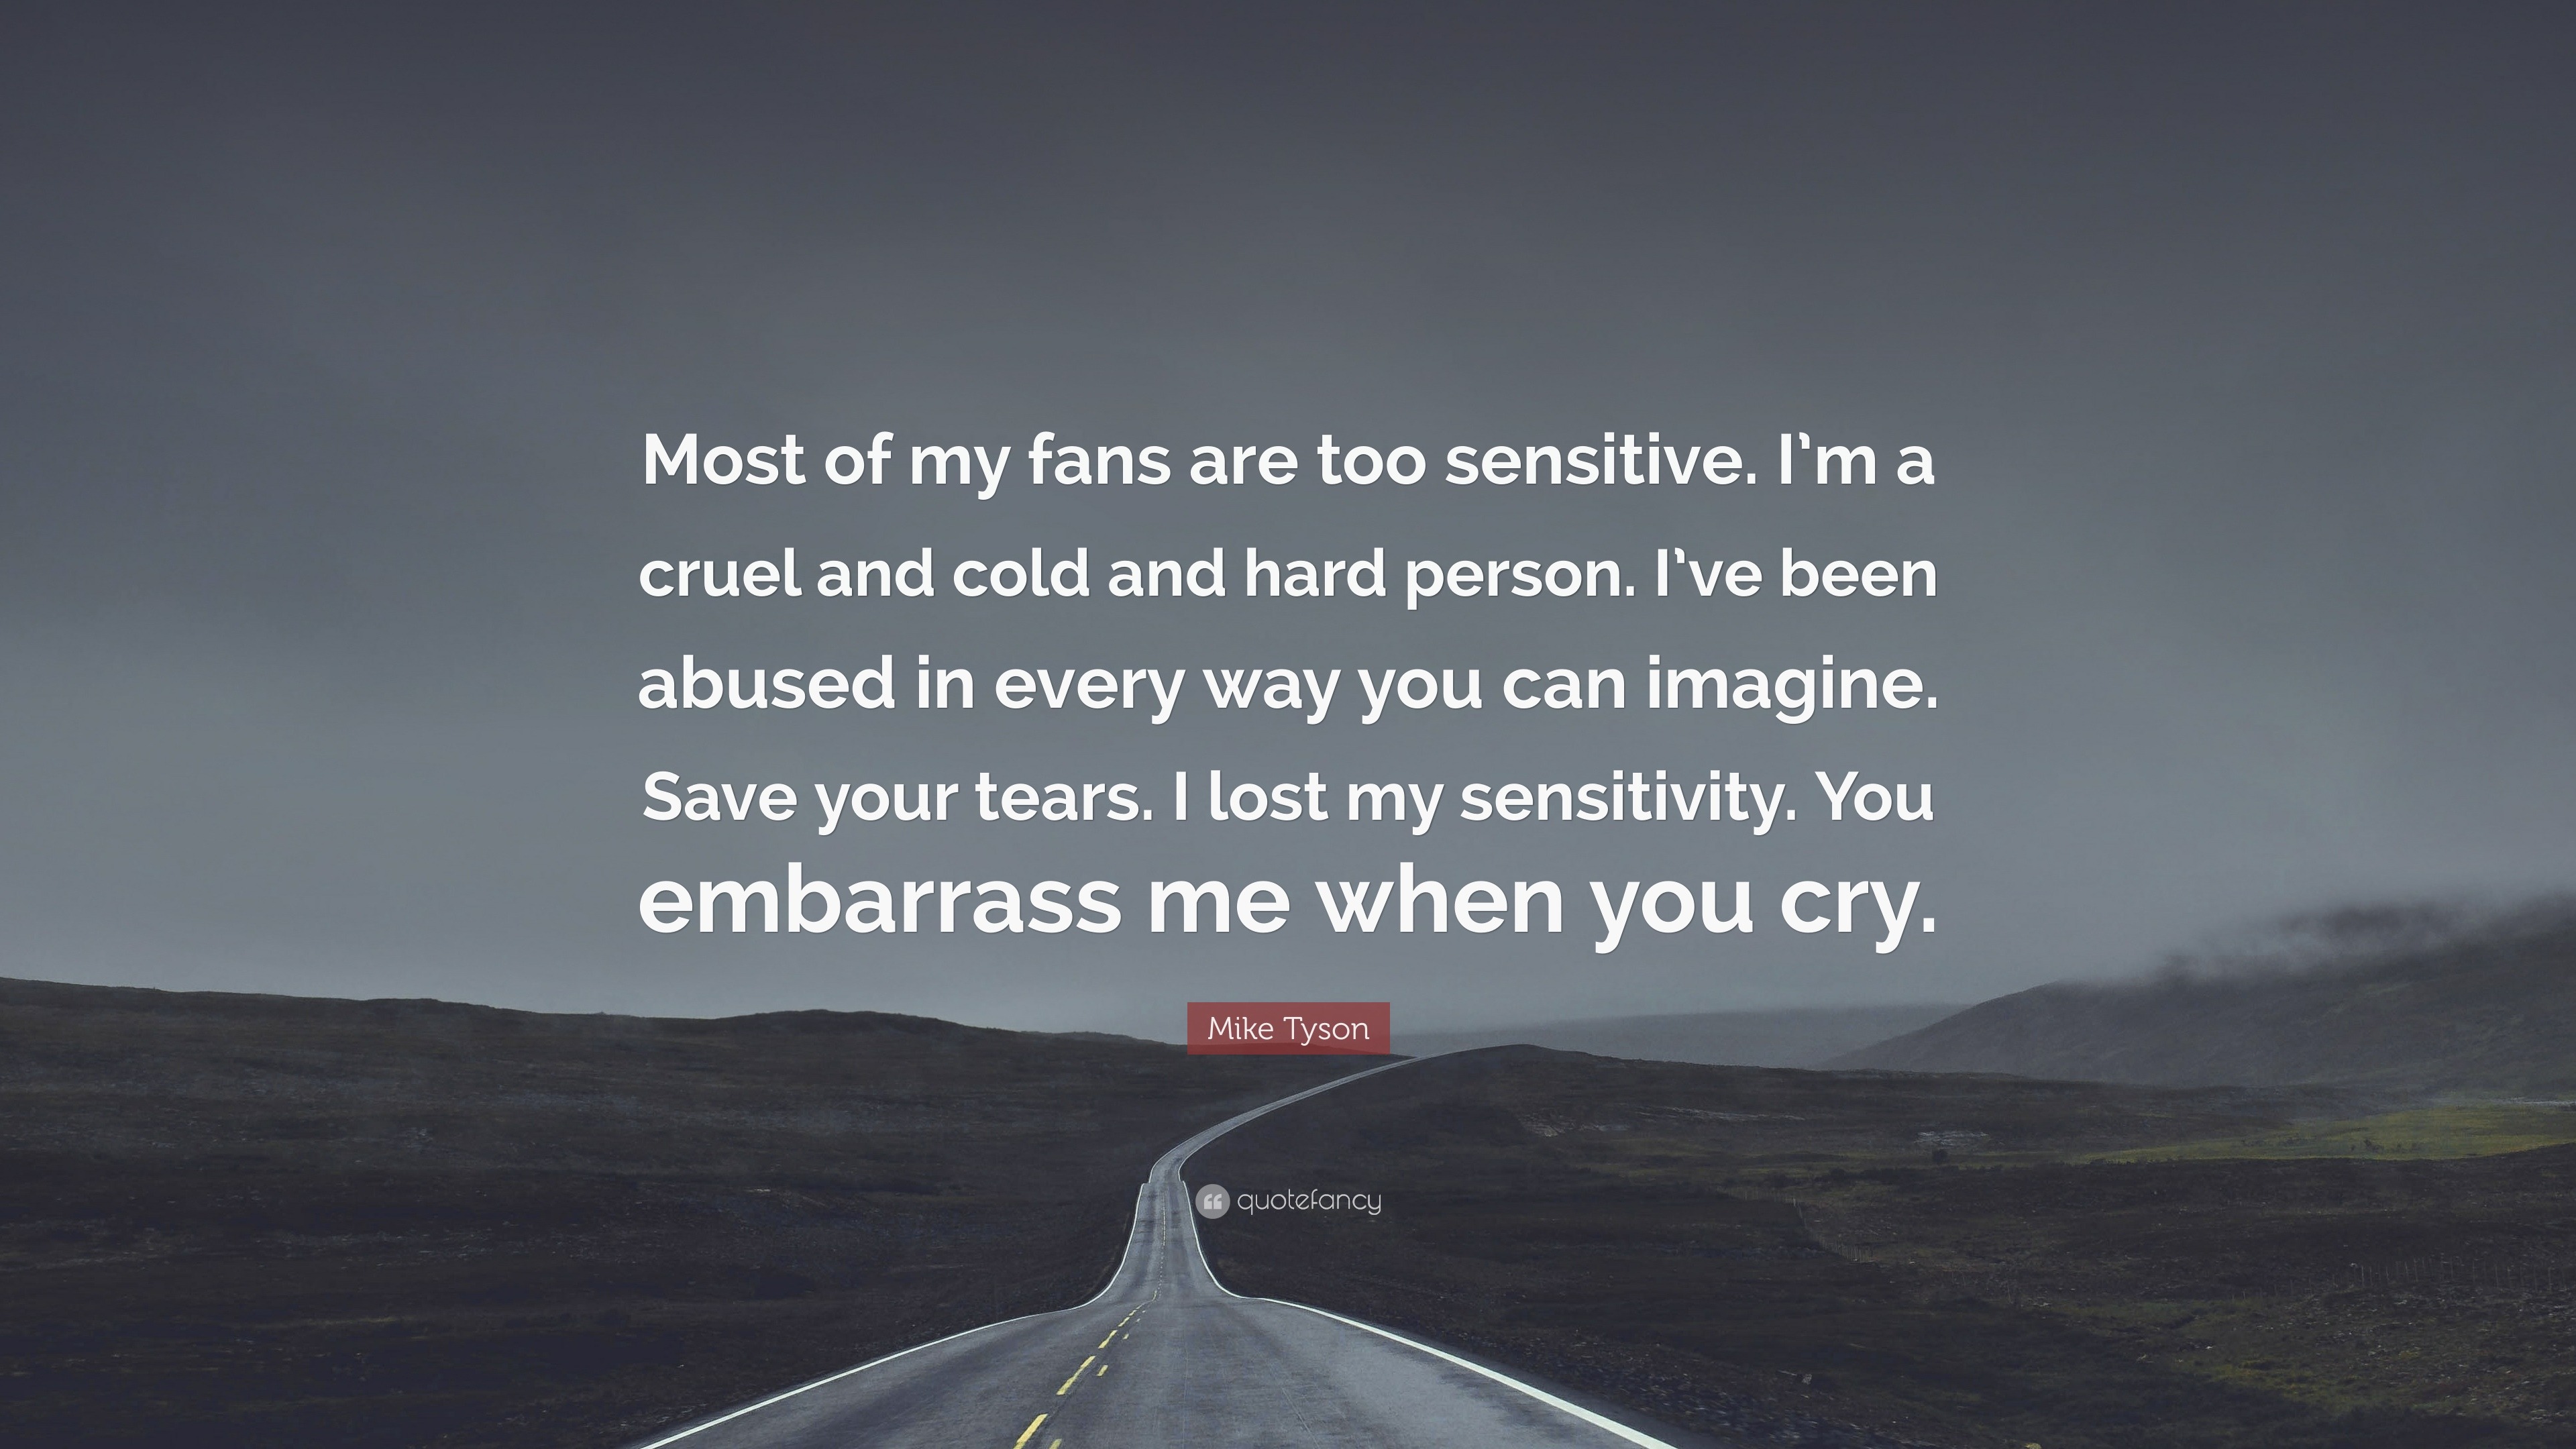 i lost my sensitivity. you embarrass me when you cry.